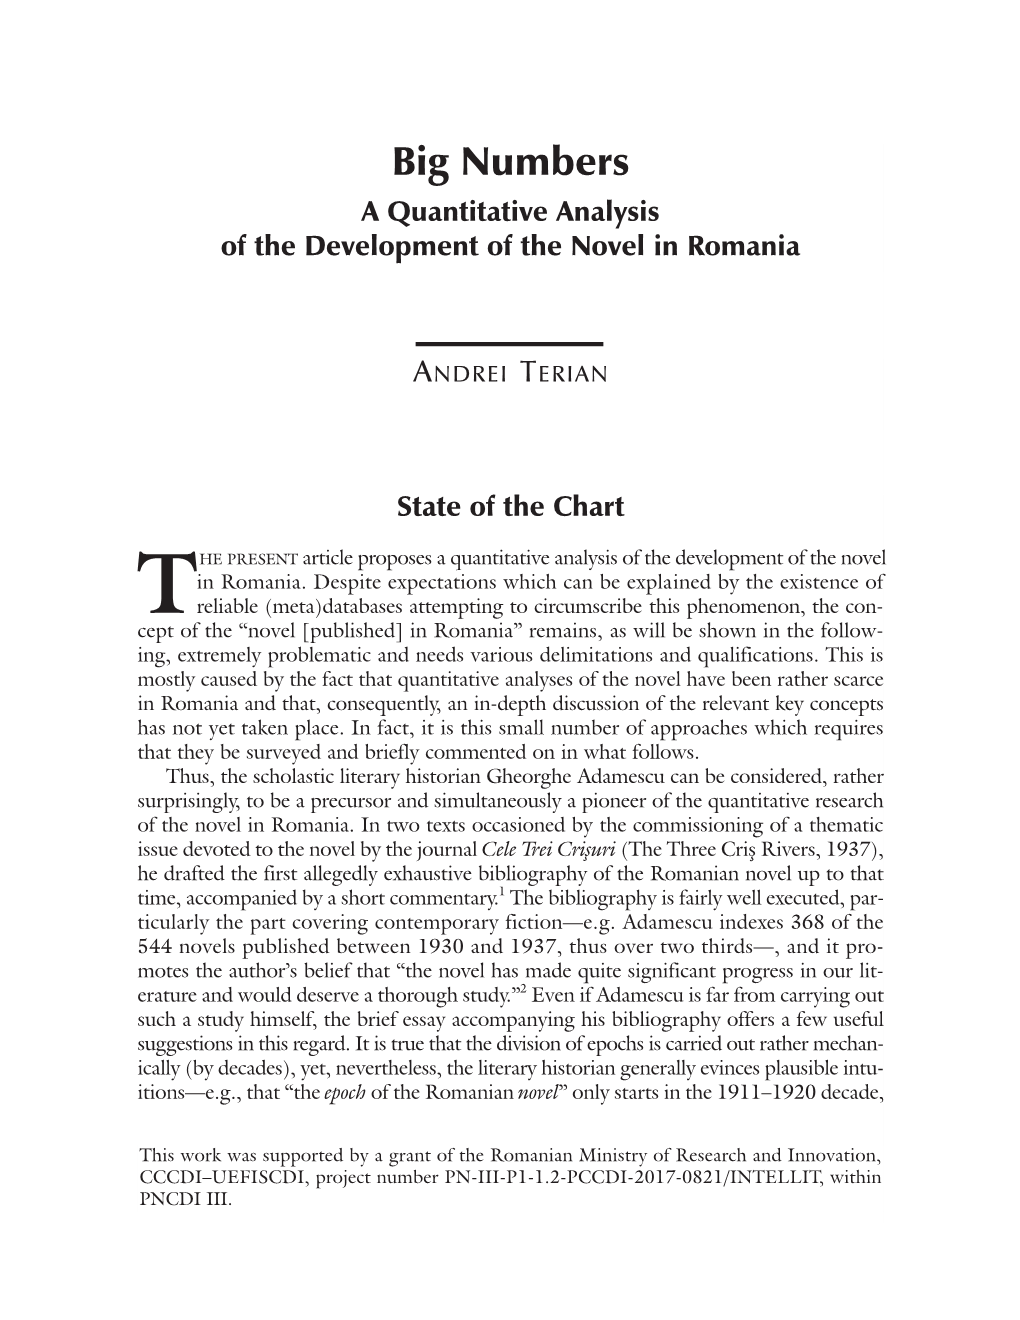 Big Numbers a Quantitative Analysis of the Development of the Novel in Romania